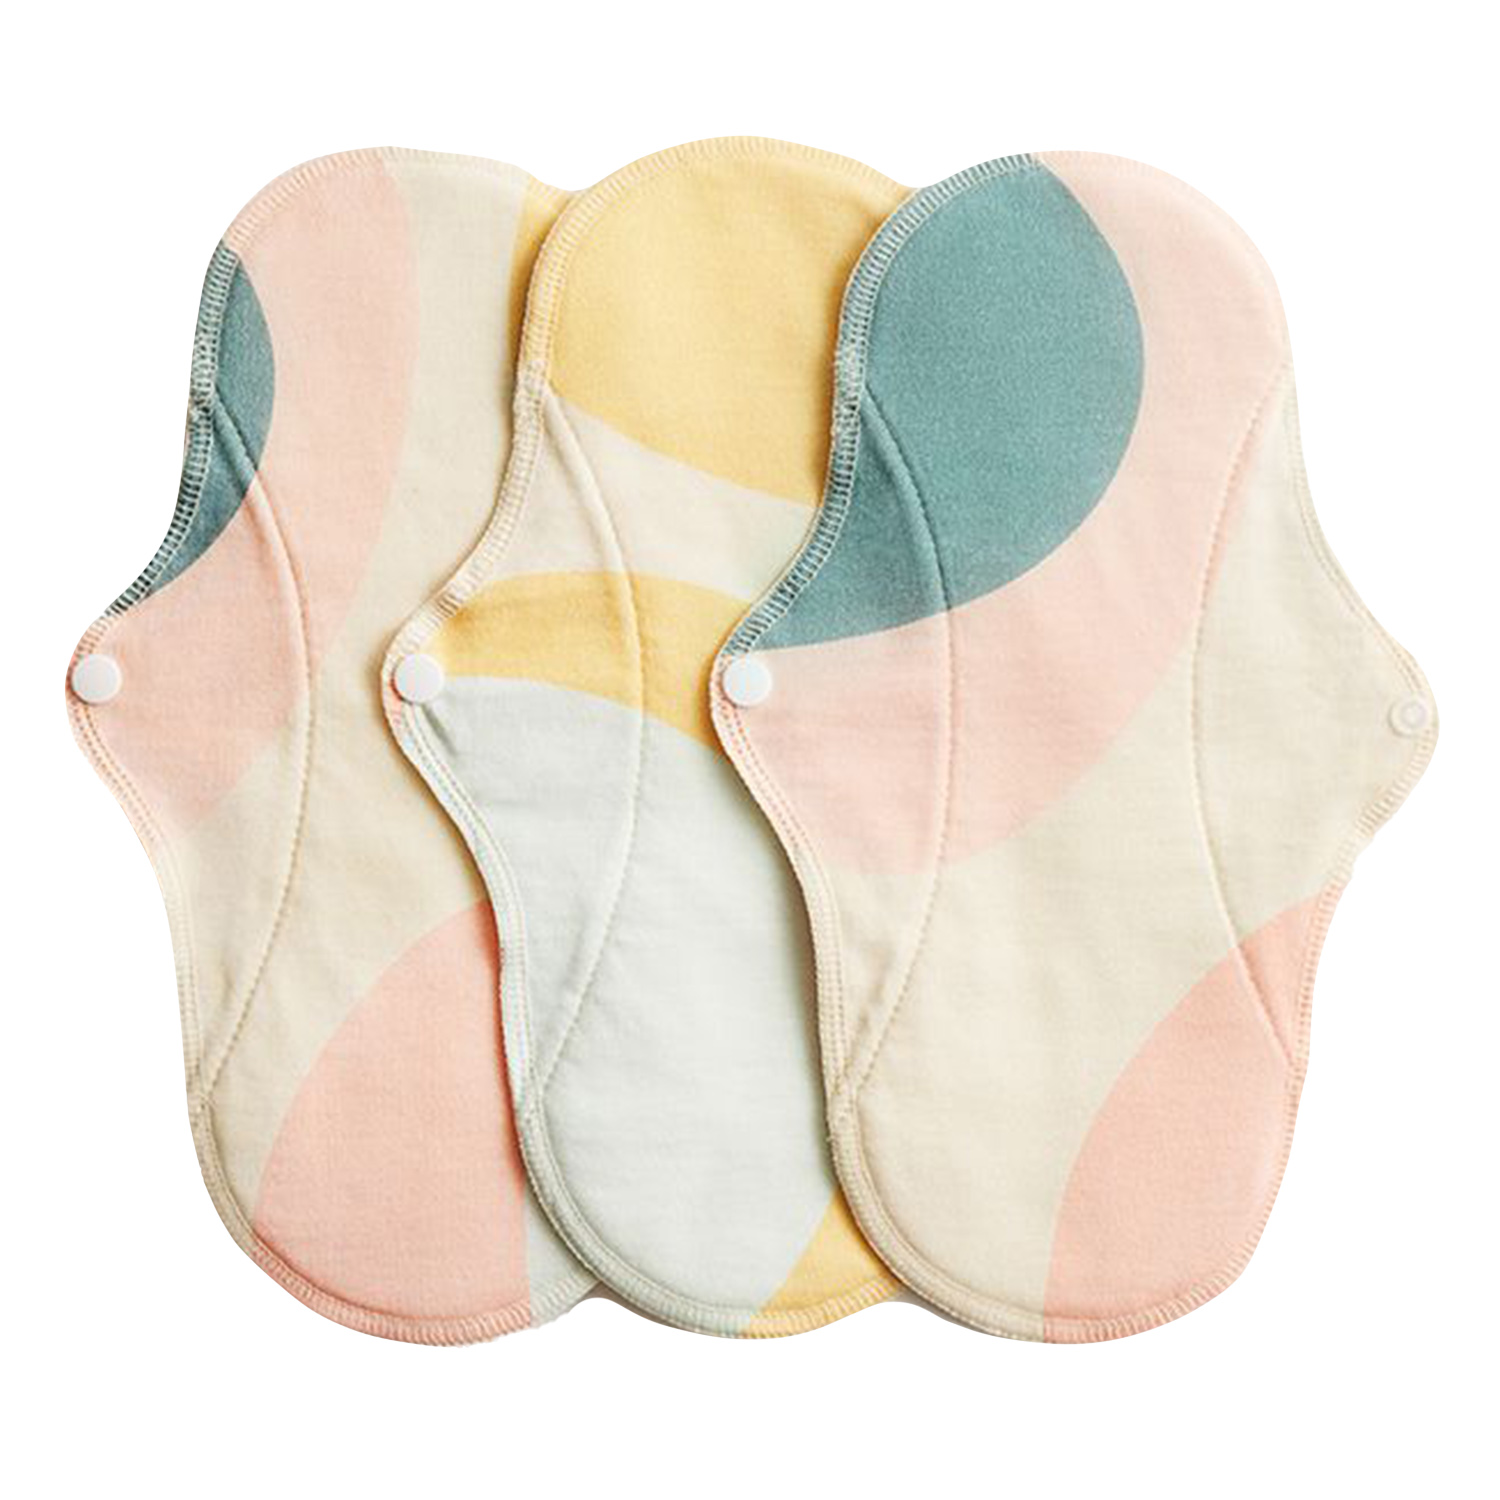 Imse Panty Liners & Cloth Pads (Active) - 3 Pcs.